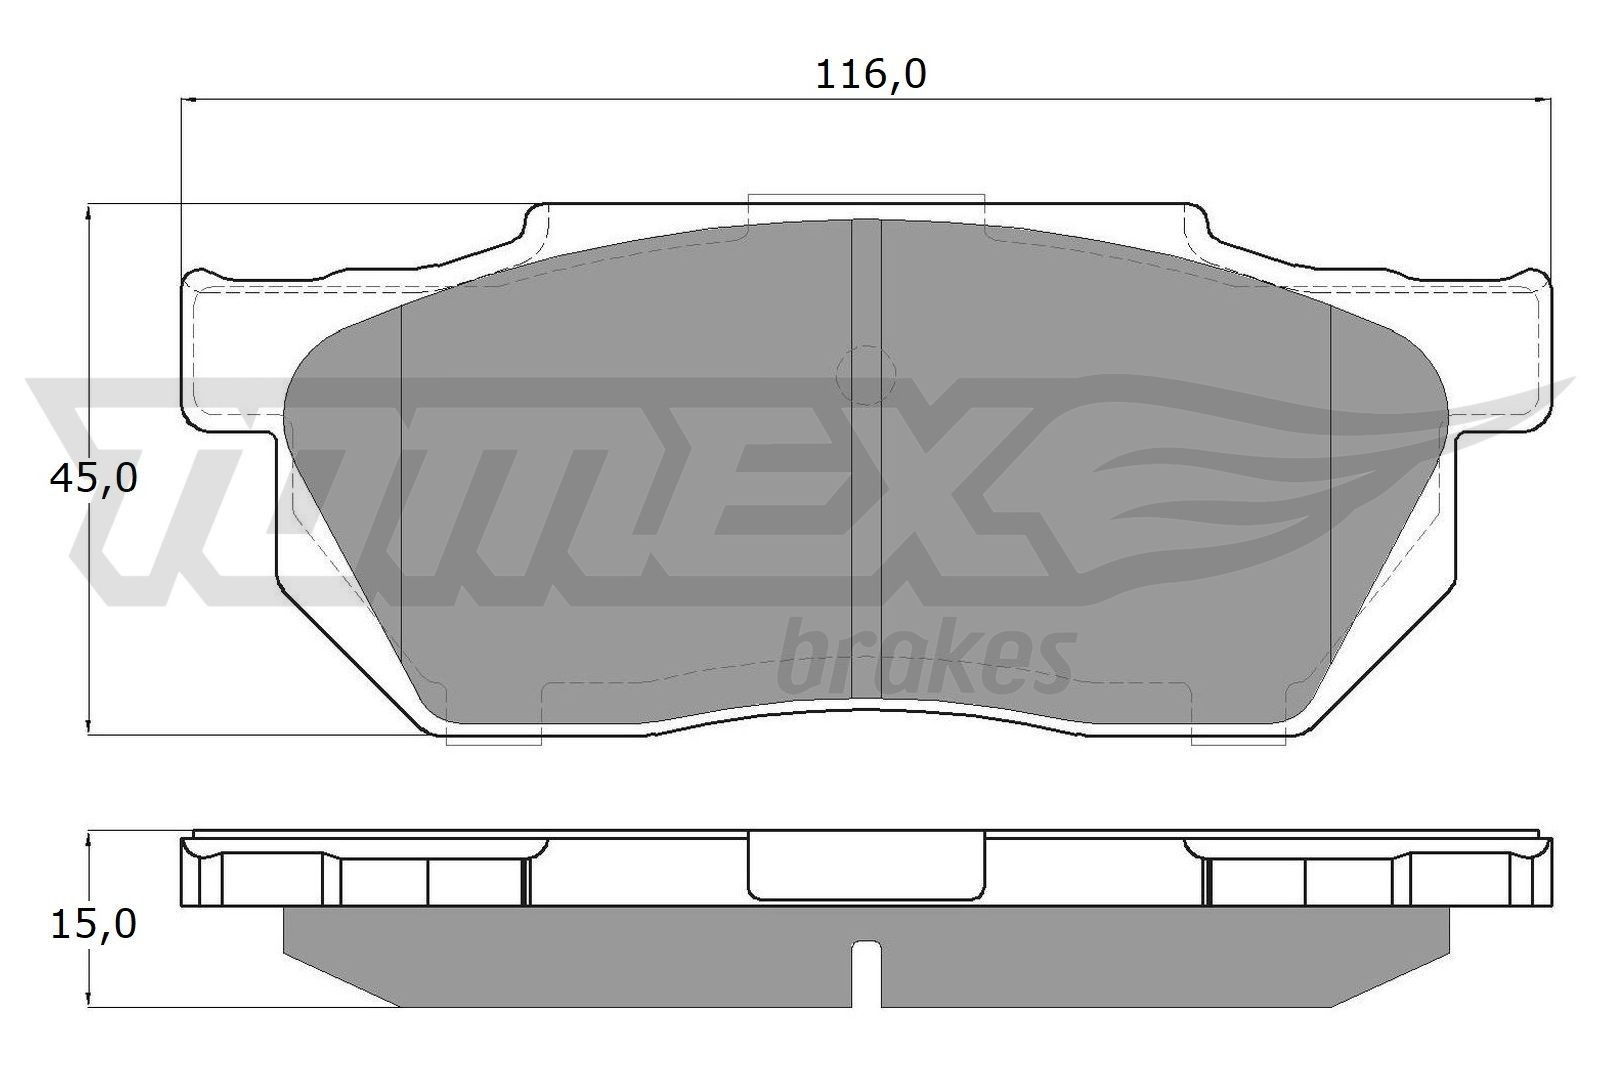 12-64 TOMEX brakes Front Axle, not prepared for wear indicator Height: 45mm, Width: 116mm, Thickness: 15mm Brake pads TX 12-64 buy